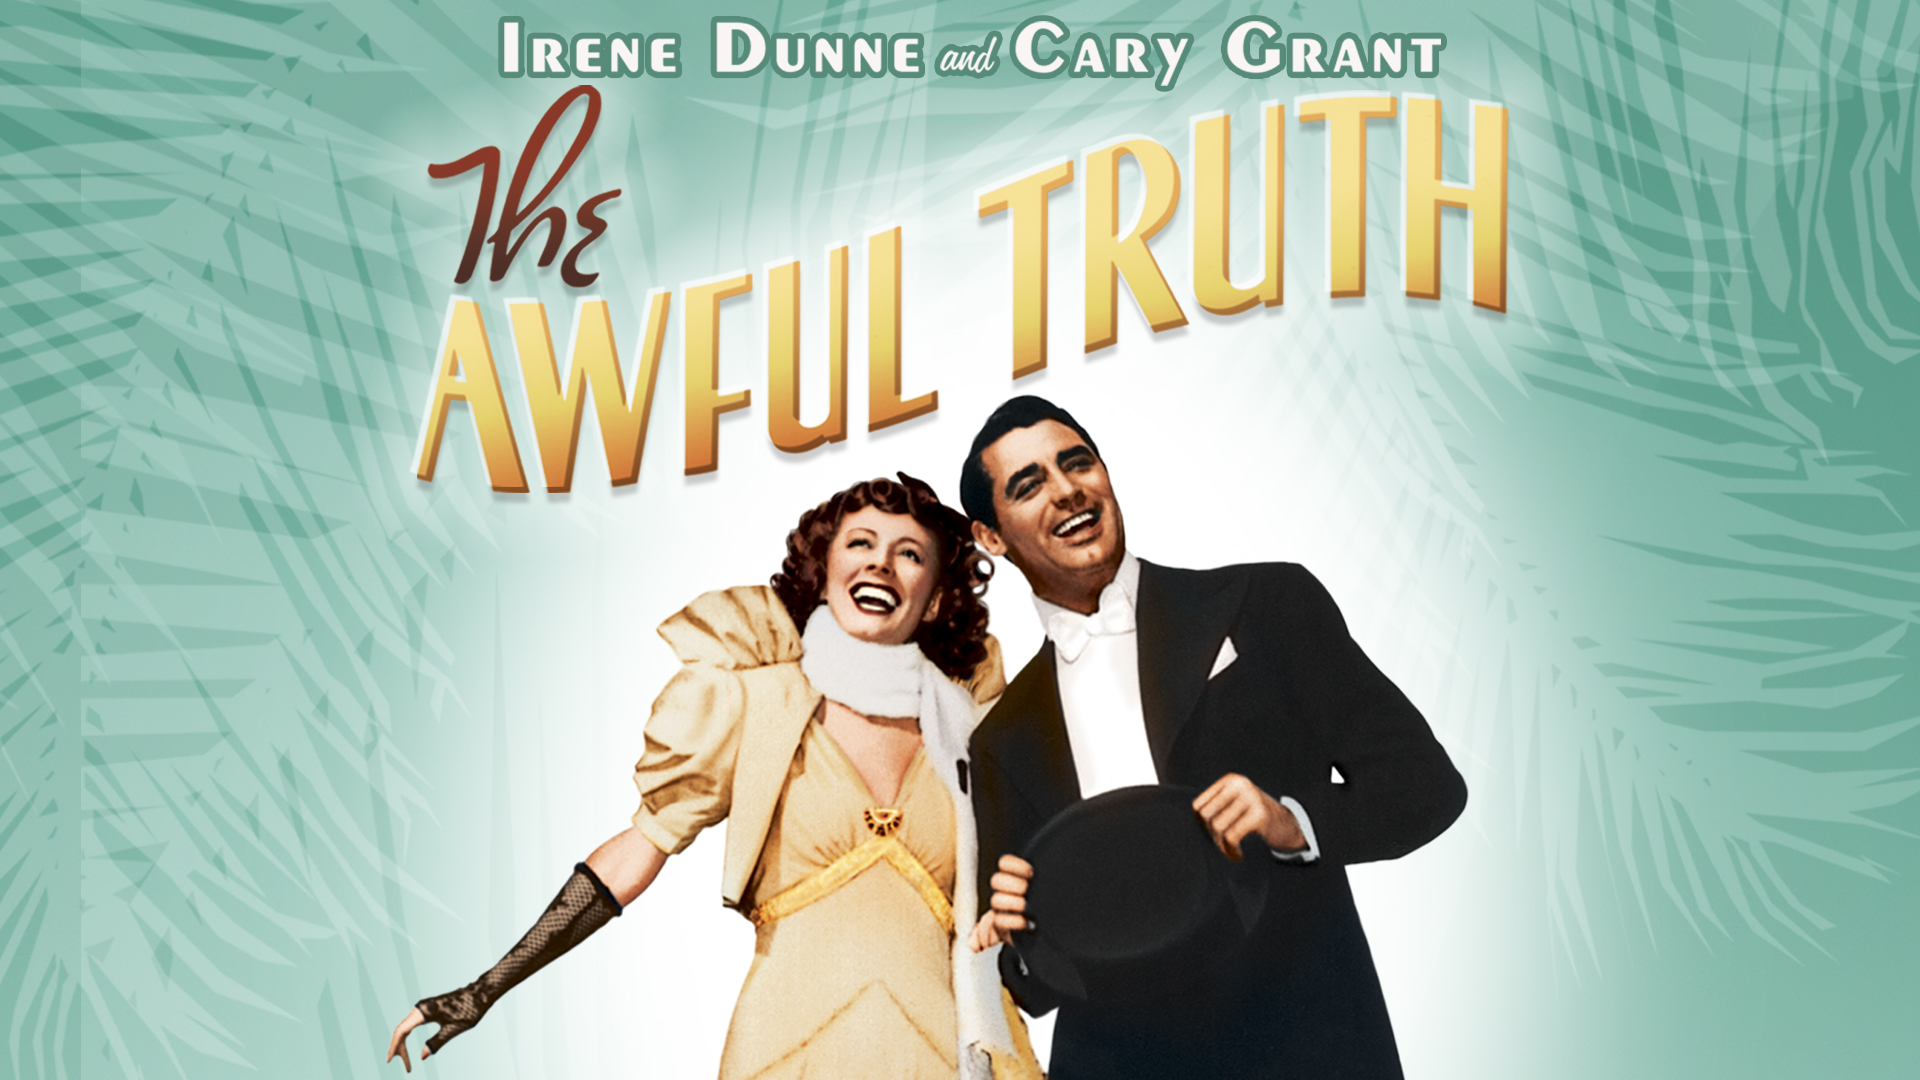 43-facts-about-the-movie-the-awful-truth